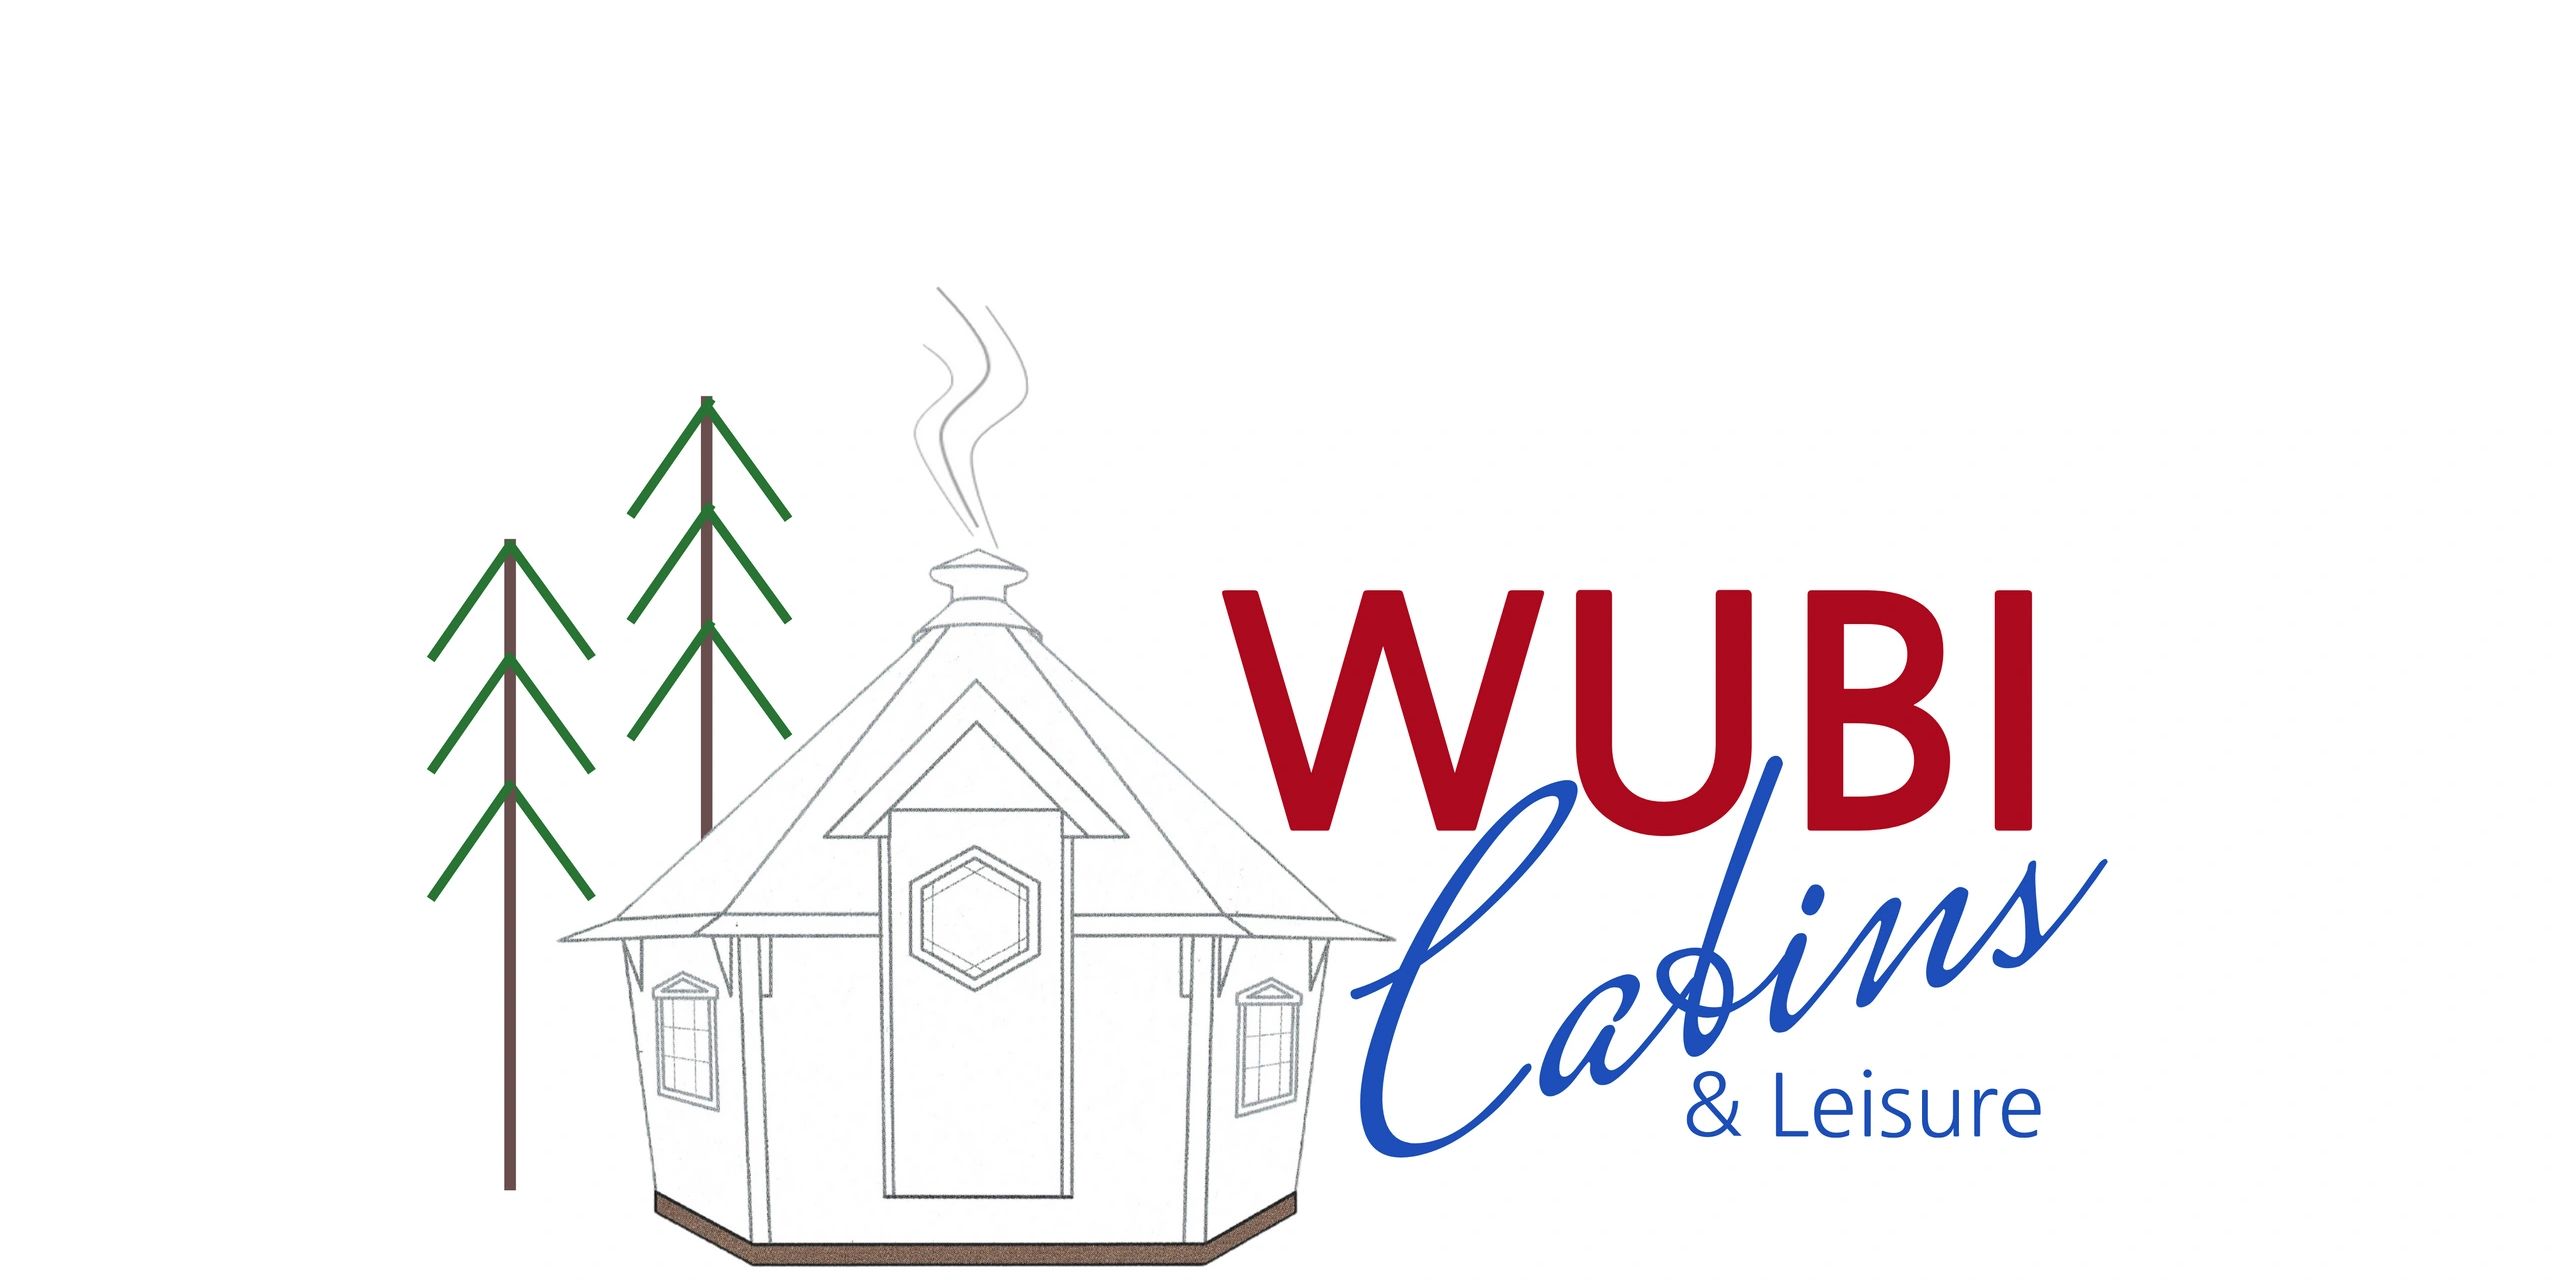 WUBI Cabins and Leisure